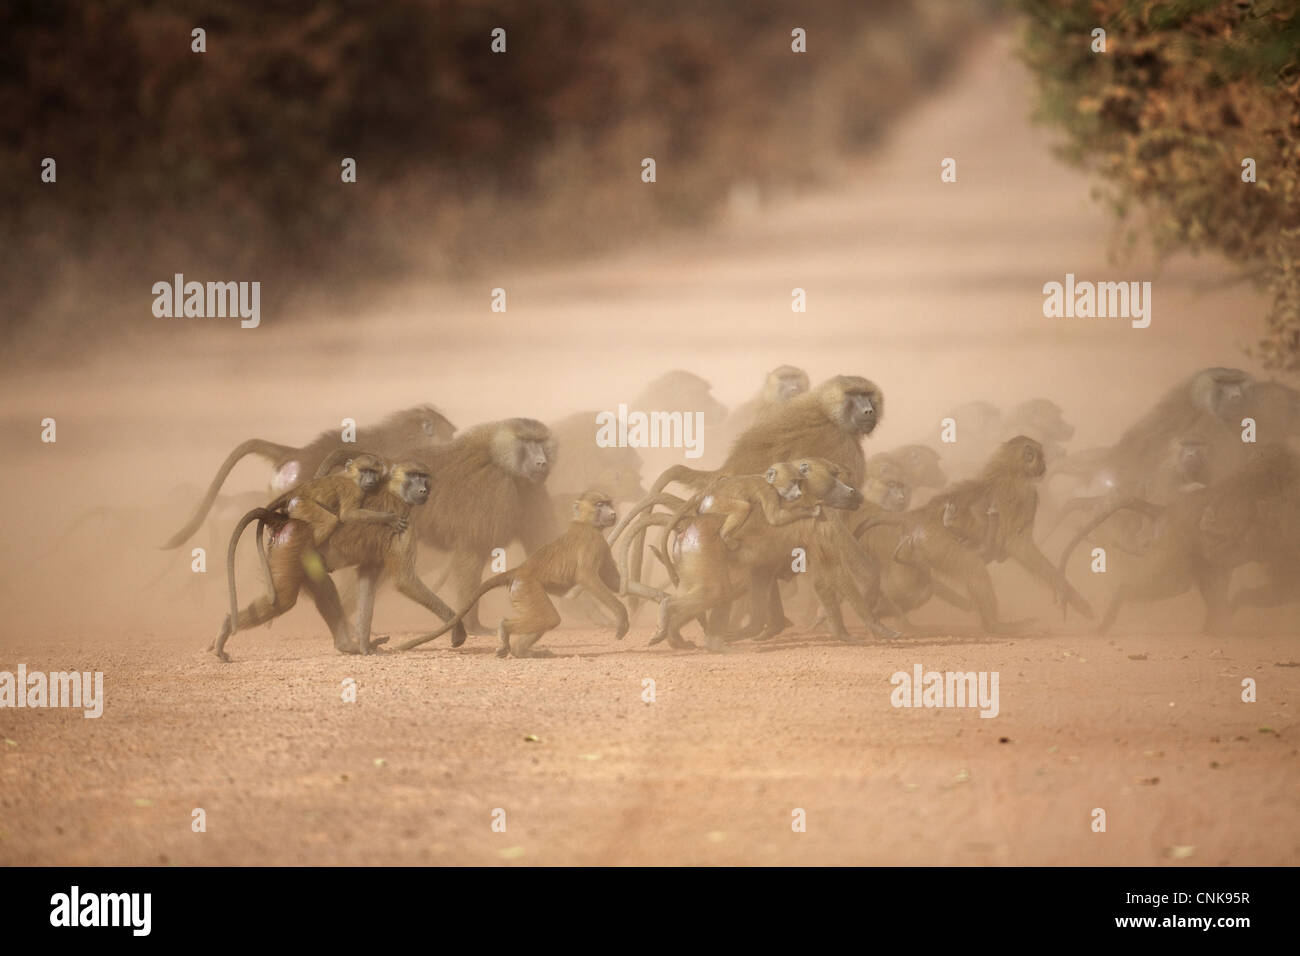 Guinea Baboon (Papio papio) adult males, adult females carrying babies and juveniles, group crossing dusty dirt road, Gambia Stock Photo